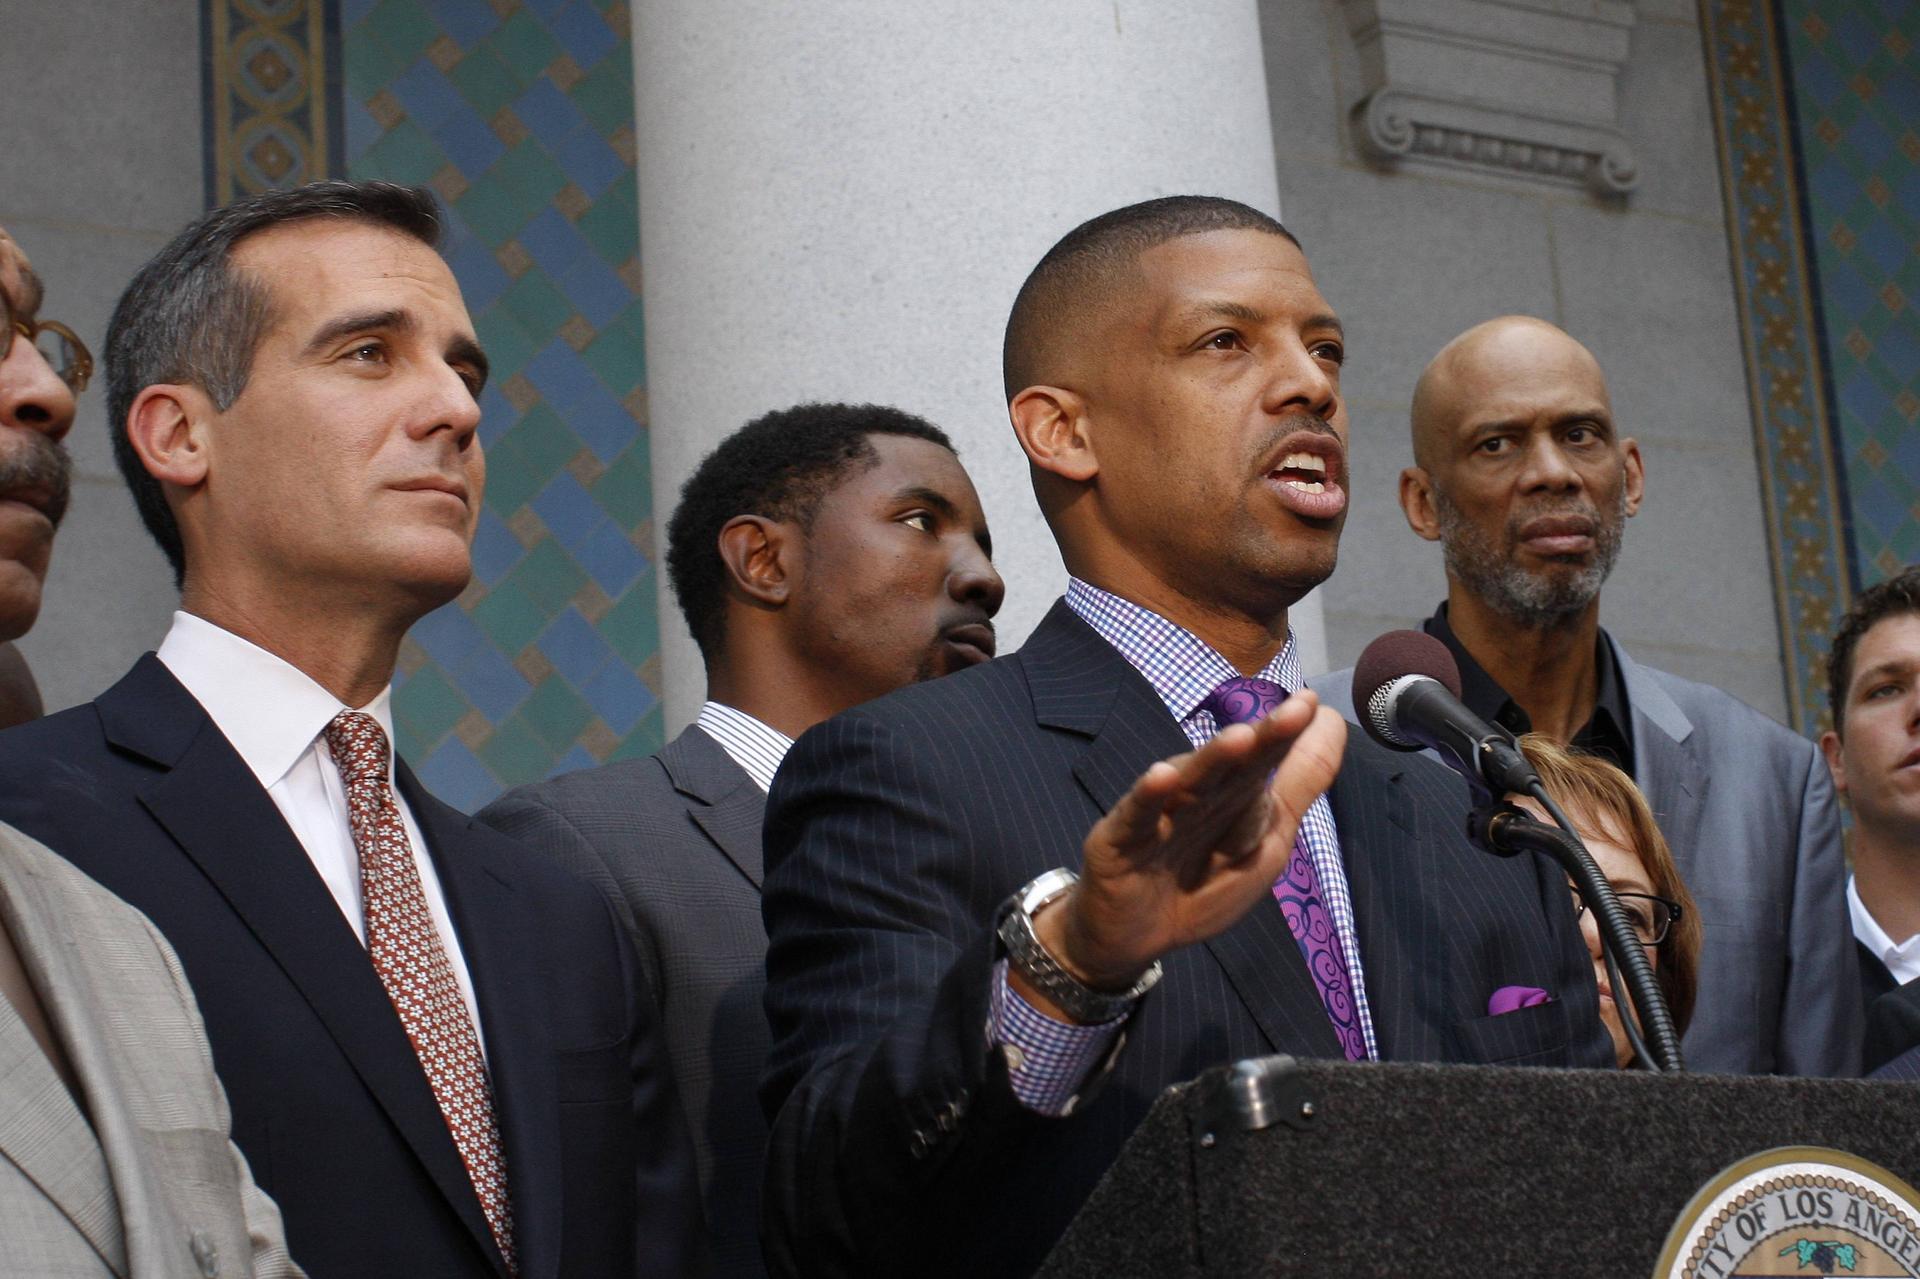 Sacramento Mayor and NBA players' union advocate Kevin Johnson addresses a news conference as Los Angeles Mayor Eric Garcetti (left) and retired basketball star Kareem Abdul-Jabbar (right) look on. Photo: Reuters